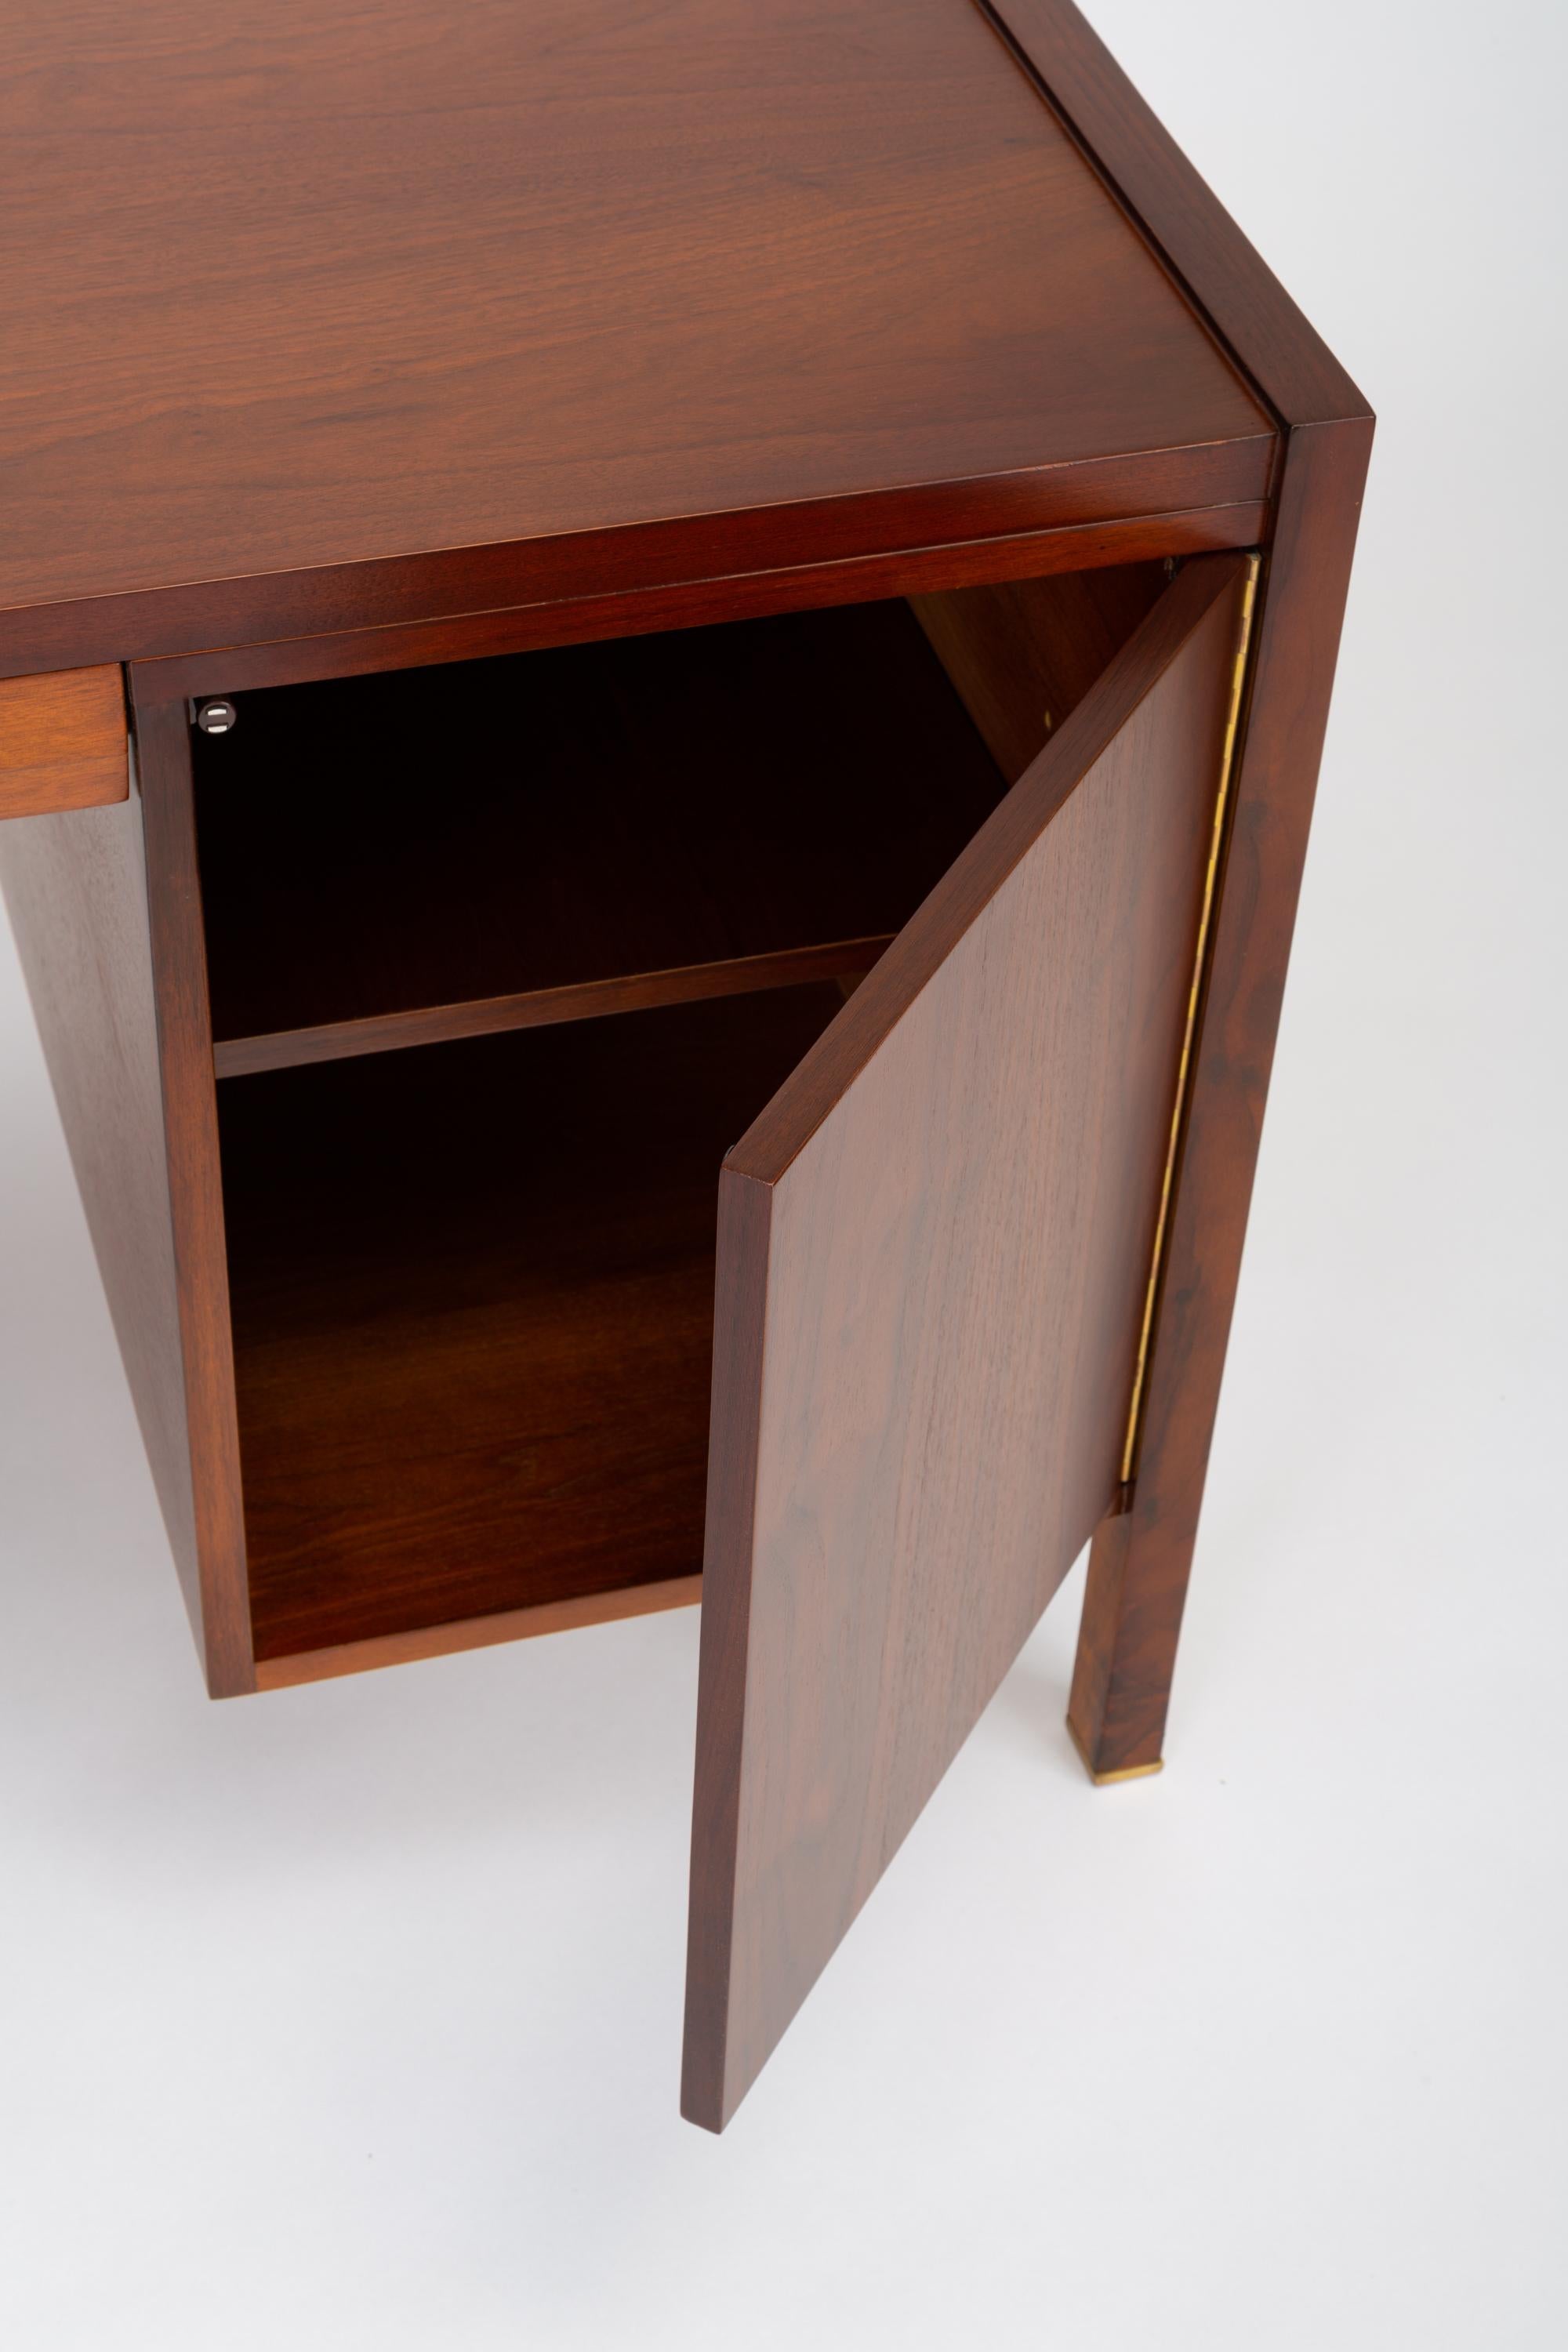 Walnut Executive Desk with Rosewood and Brass Details, Edward Wormley for Dunbar 10